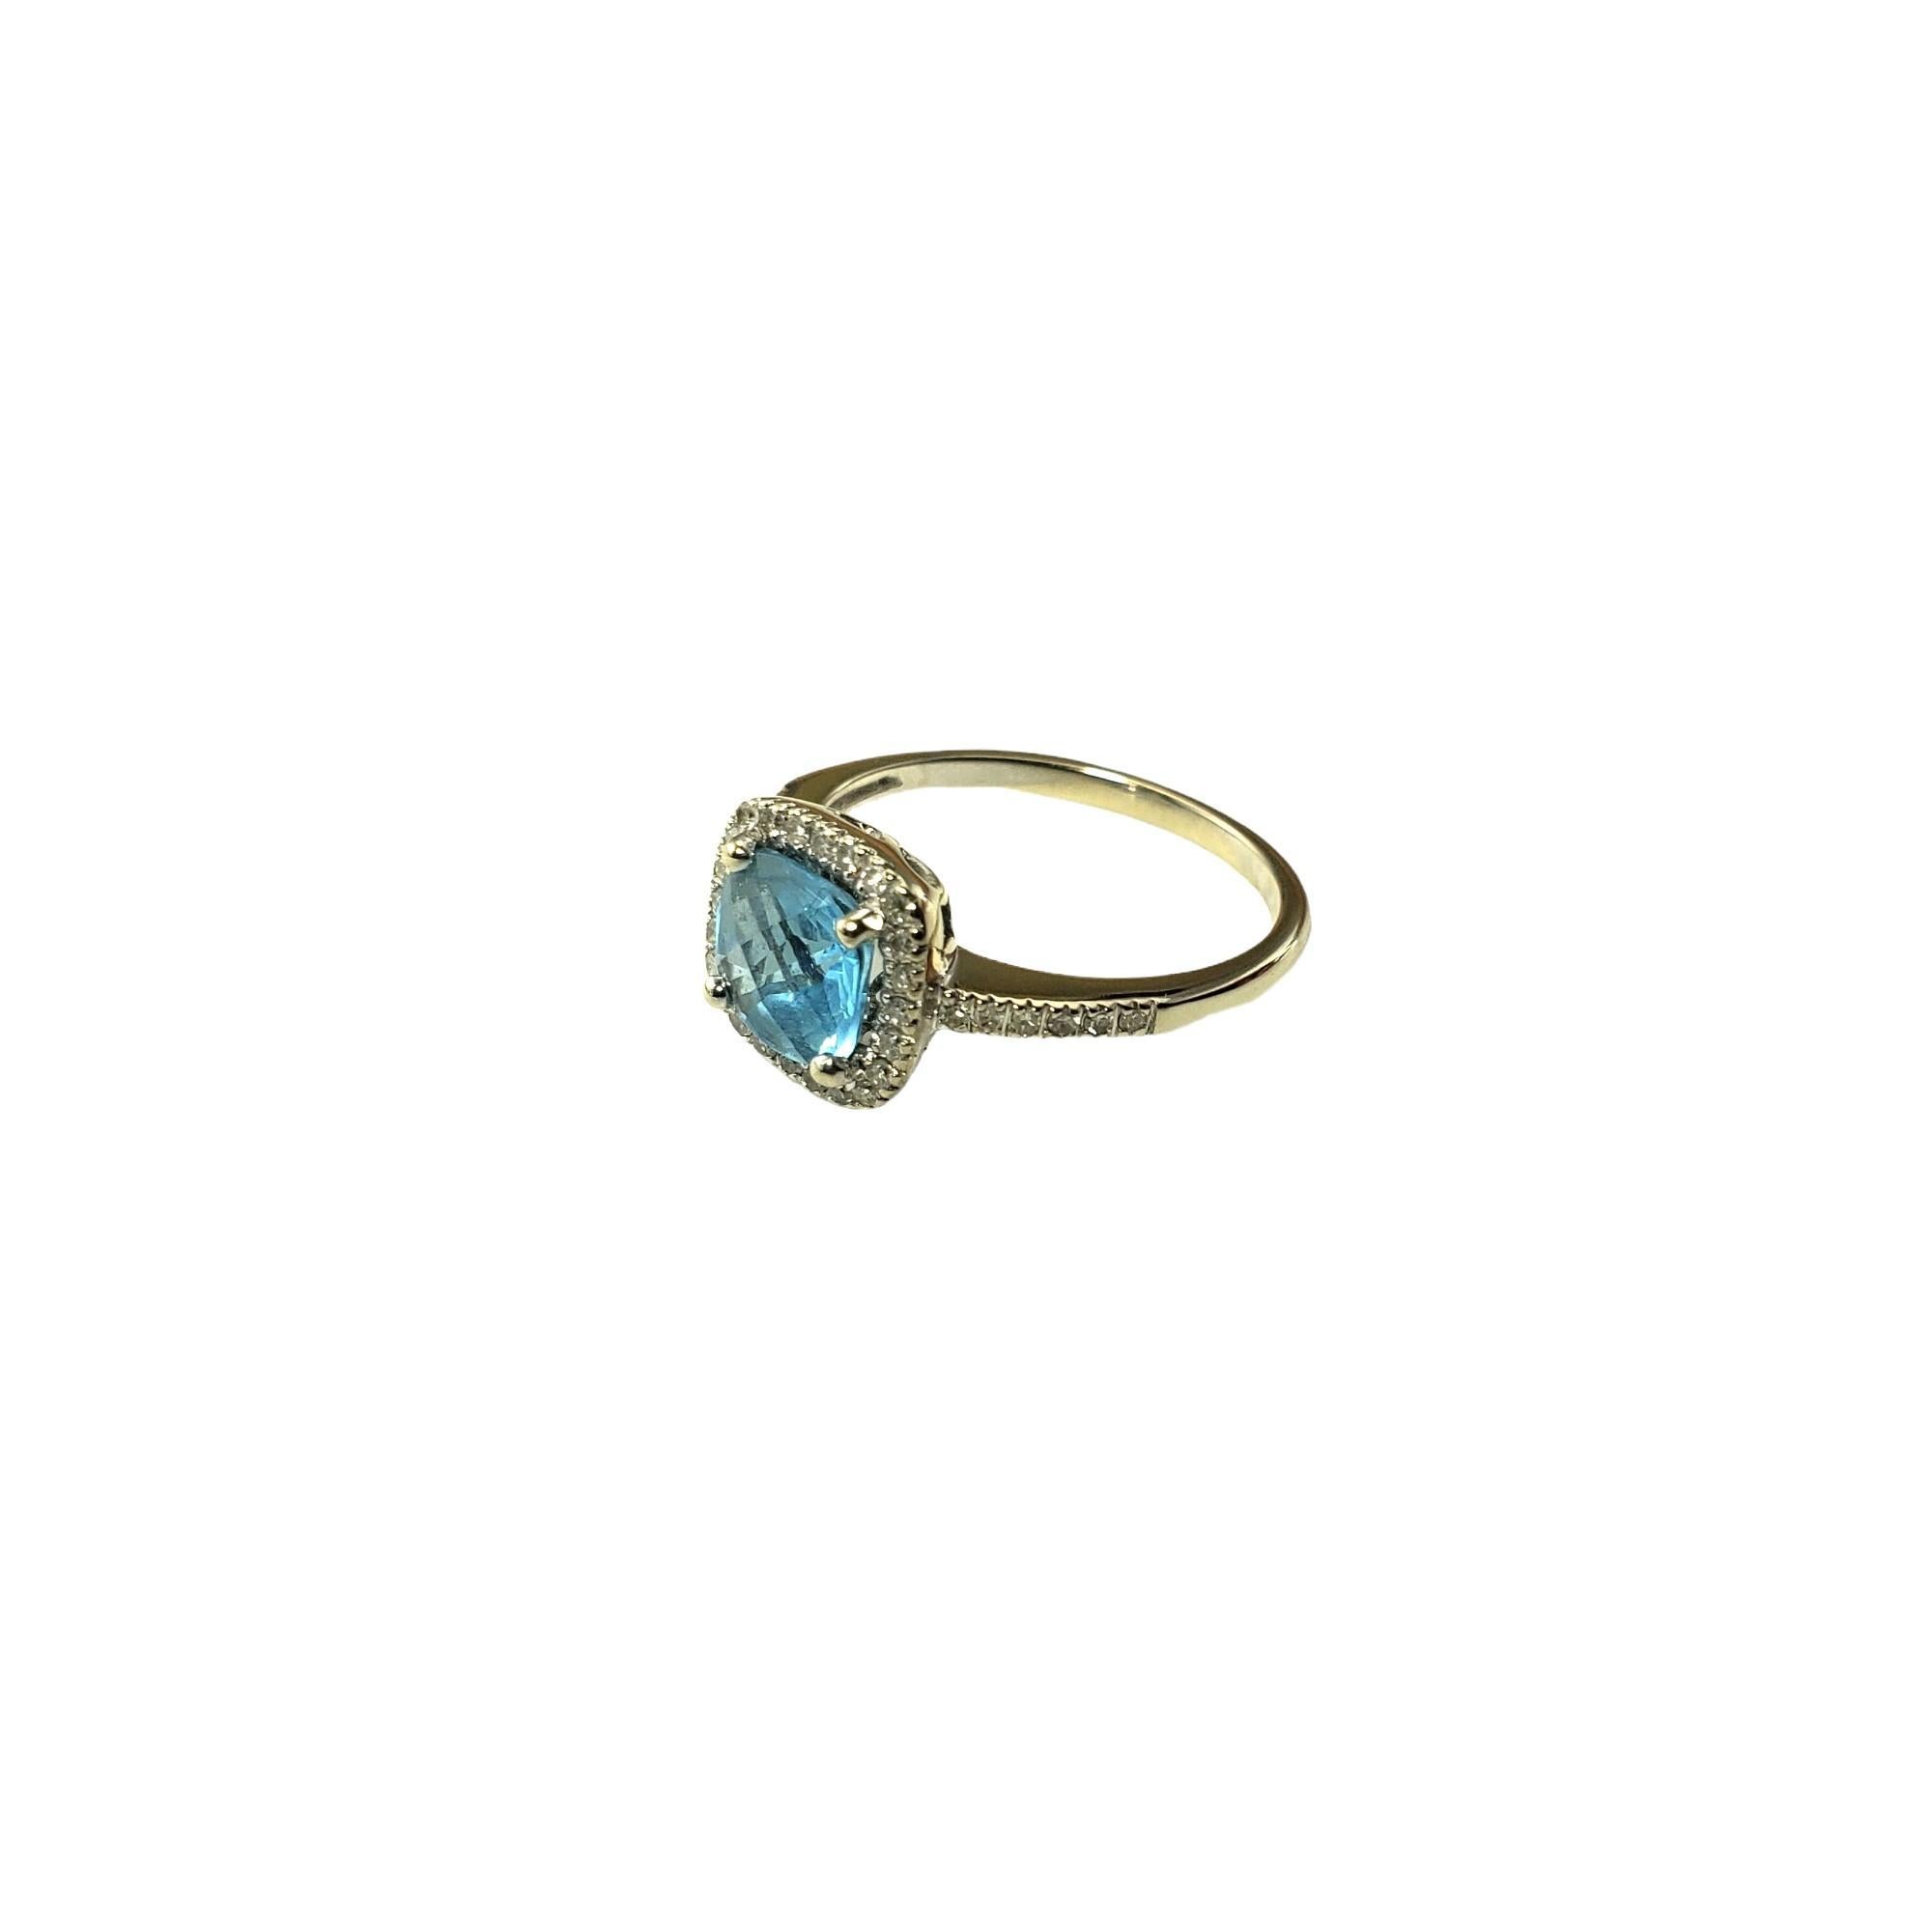 Vintage 14 Karat White Gold Blue Topaz and Diamond Ring Size 7.25 #15633 In Good Condition For Sale In Washington Depot, CT